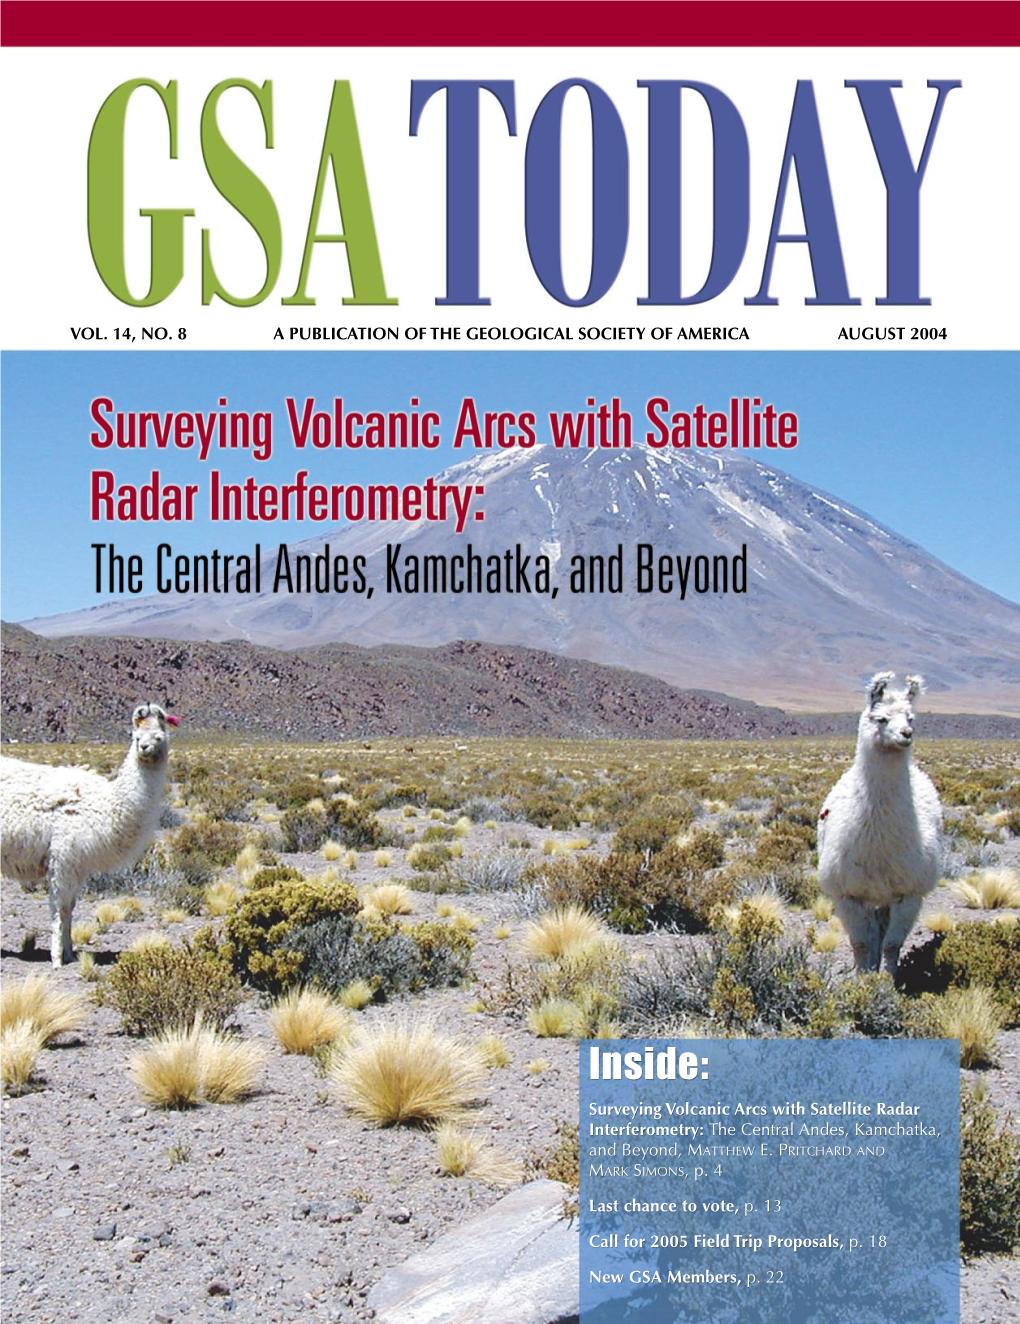 Inside: Surveying Volcanic Arcs with Satellite Radar Interferometry: the Central Andes, Kamchatka, and Beyond, MATTHEW E